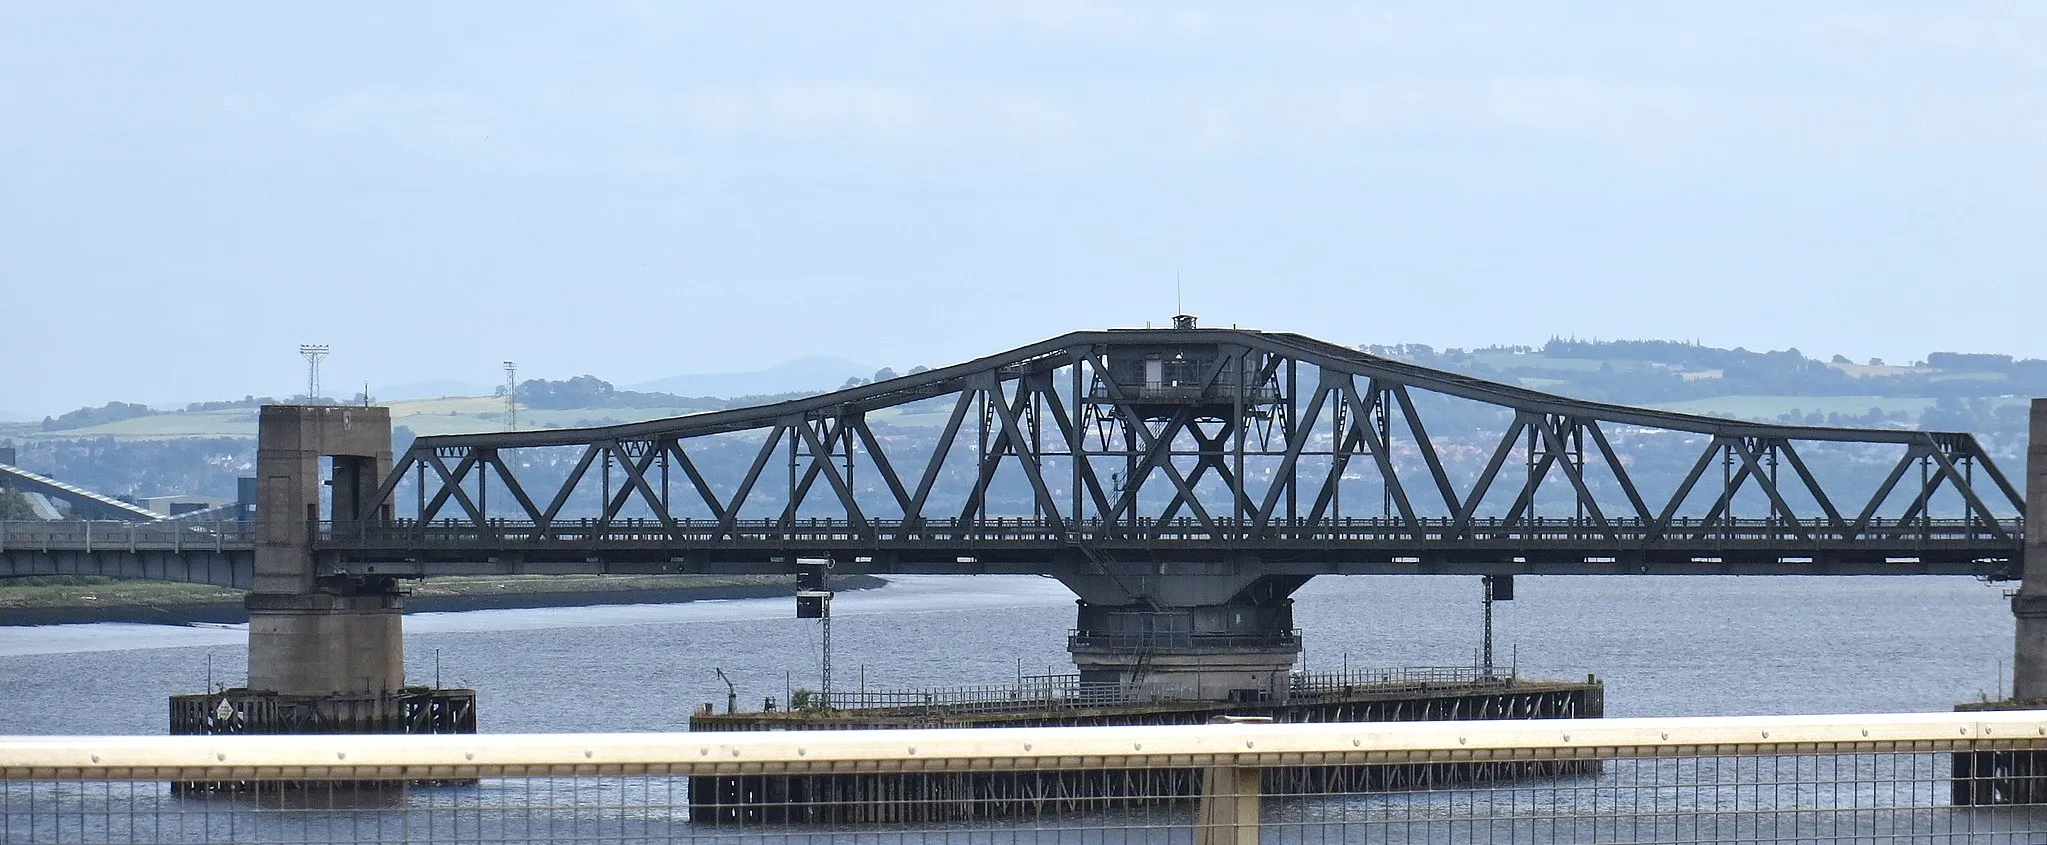 Photo showing: The swing span of Kincardine Bridge, viewed from the Clackmannanshire Bridge, UK.  The swing mechanism is no longer in use.